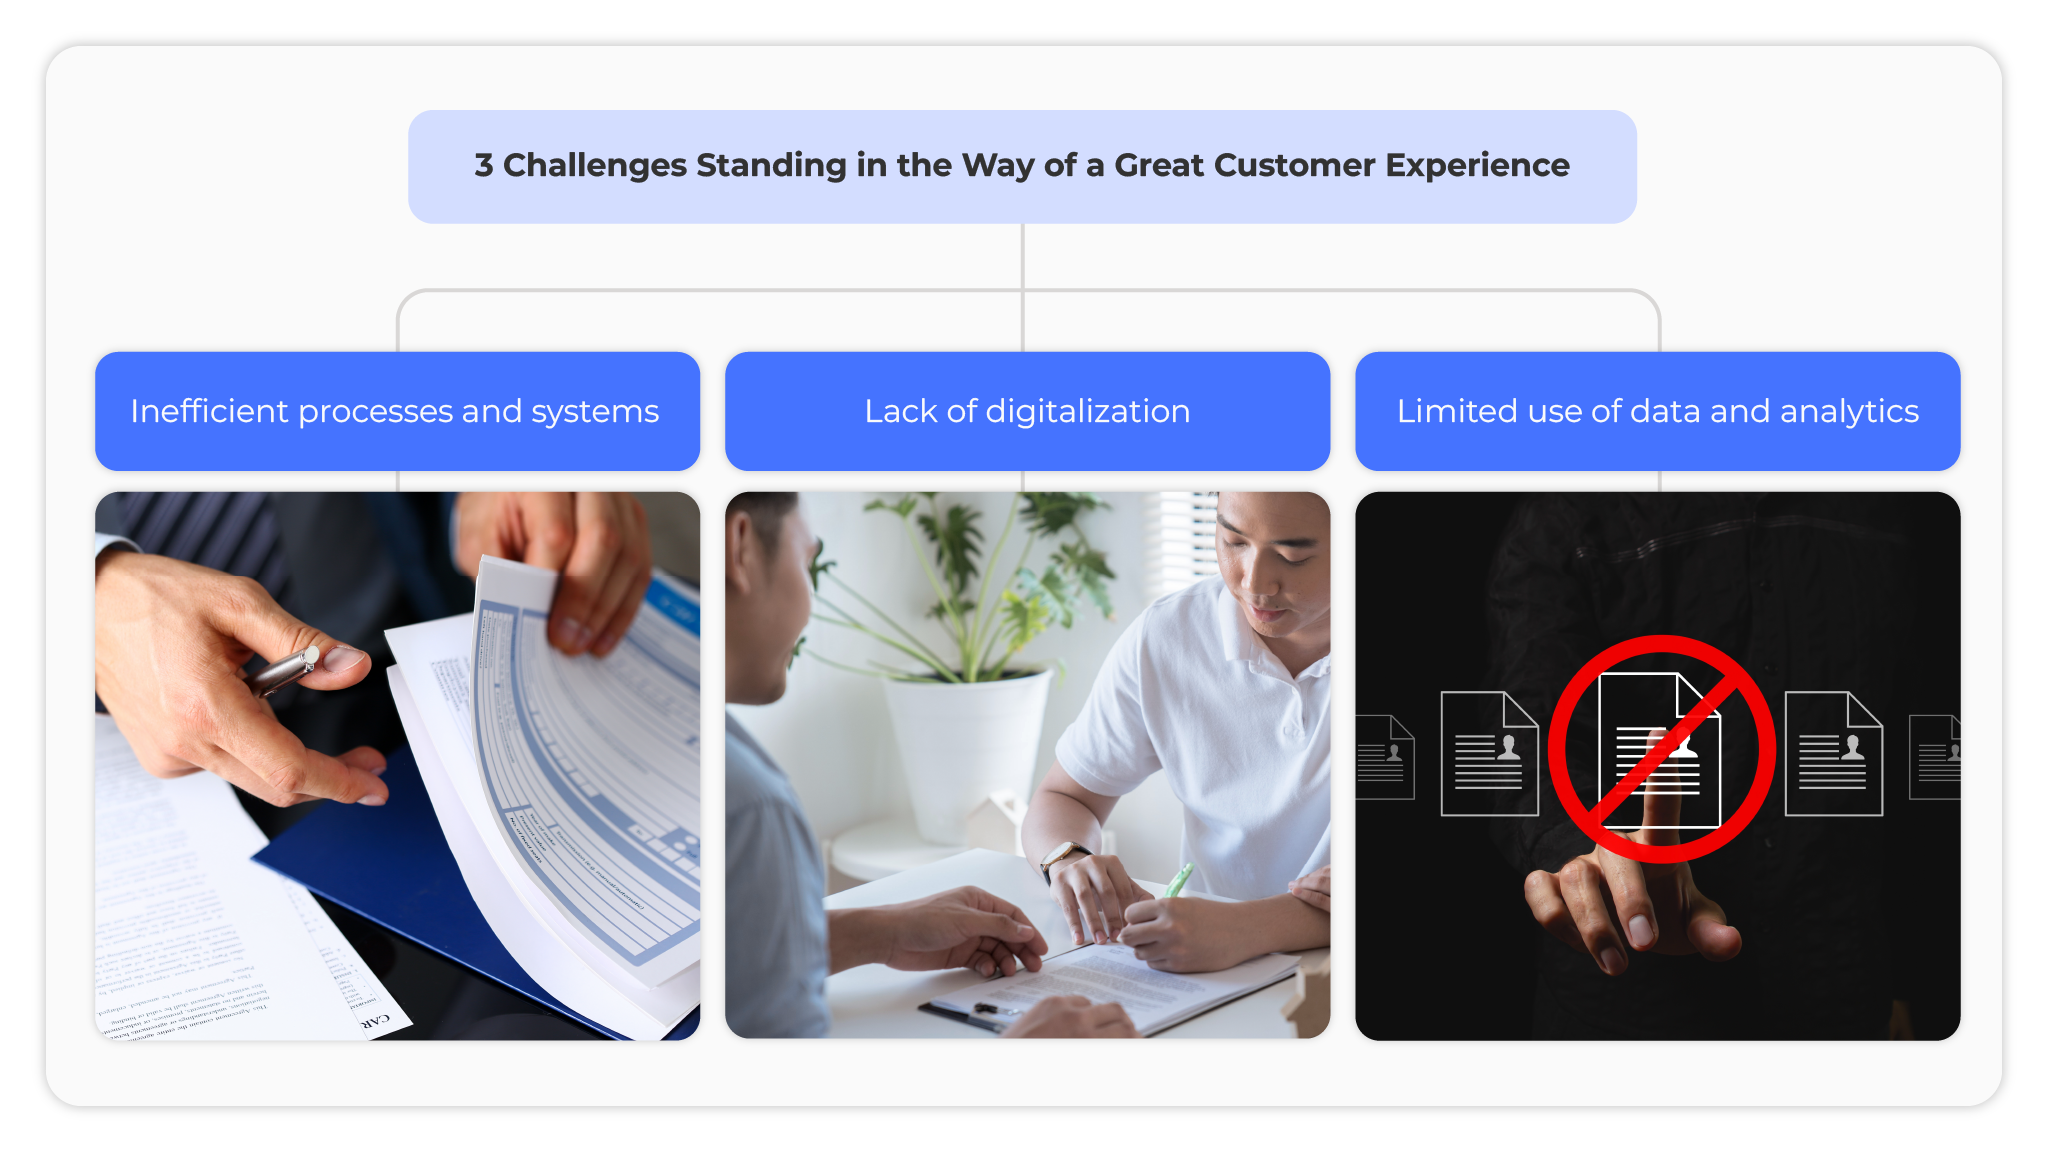 3 challenges standing in the way of a great customer experience